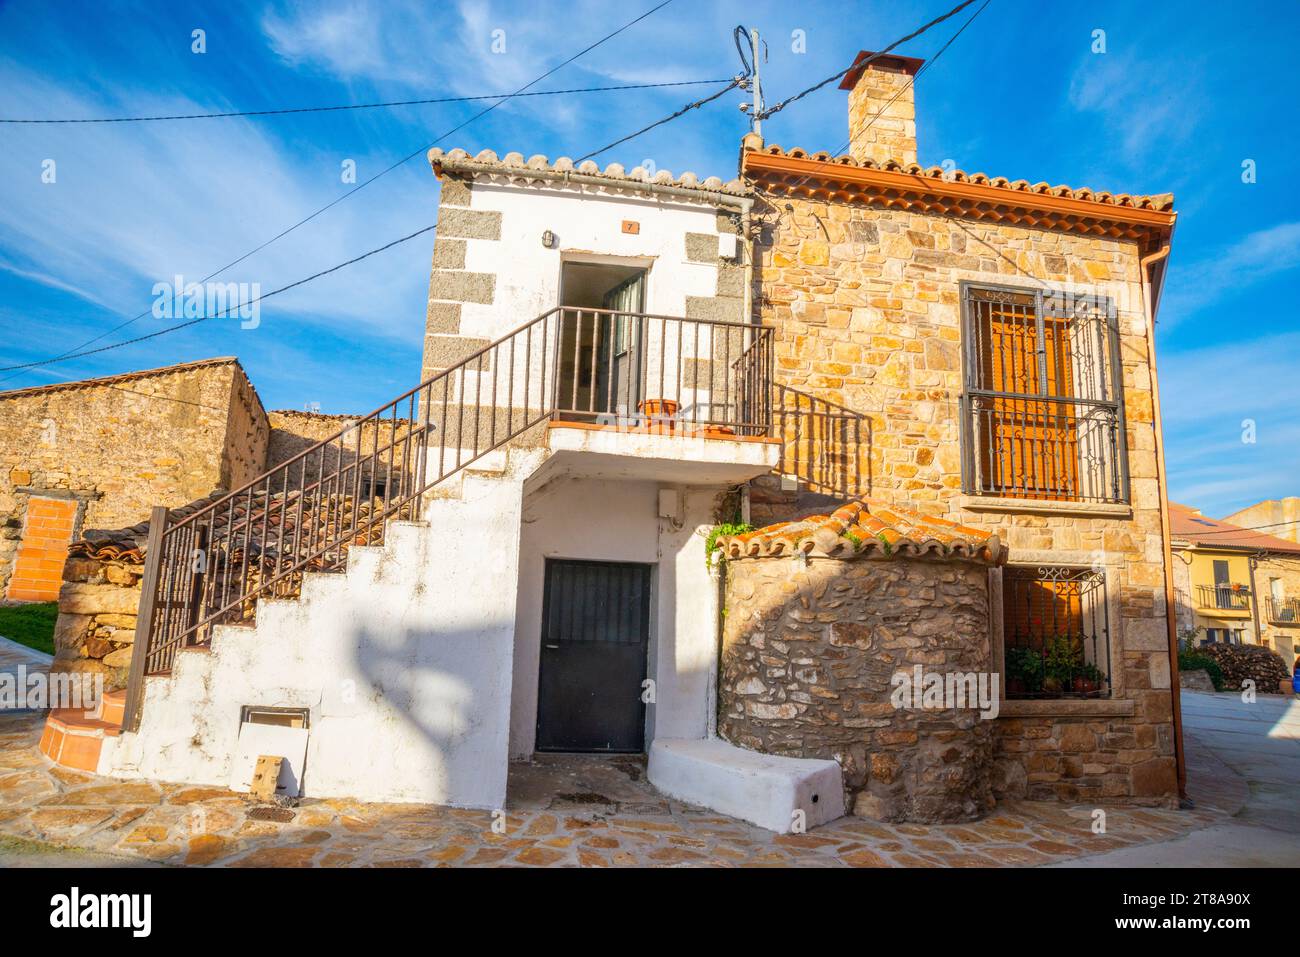 Facade of house with stairs. Gandullas, Madrid province, Spain. Stock Photo